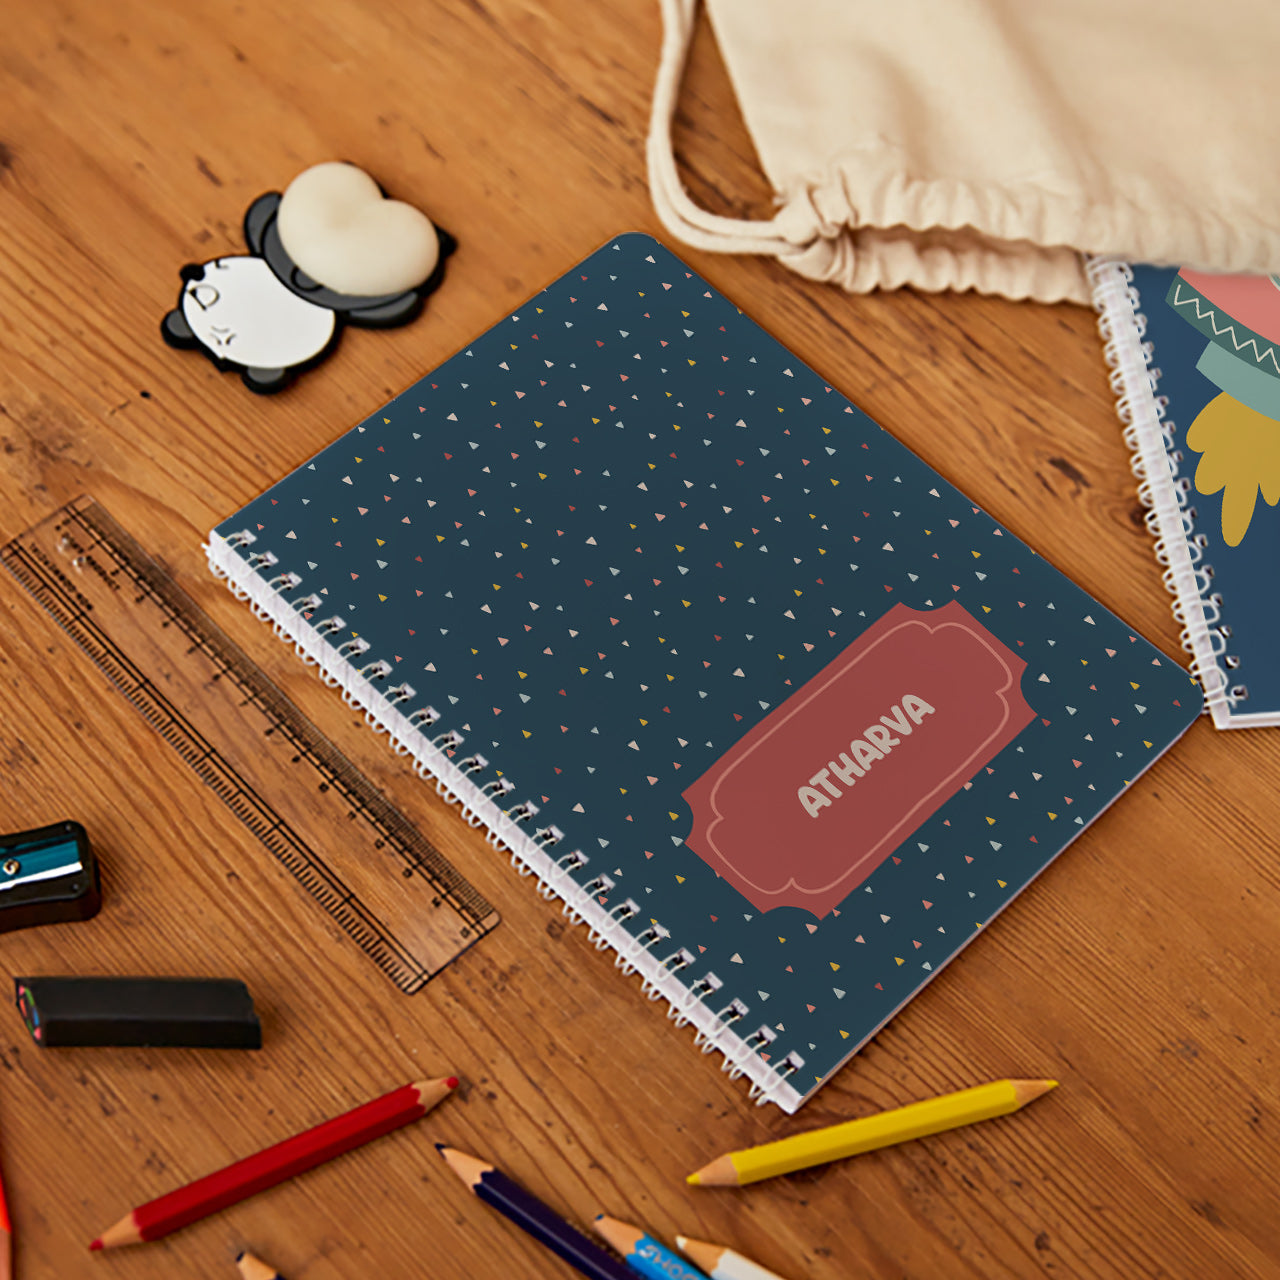 Personalised Spiral Notebook - Triangle Tango